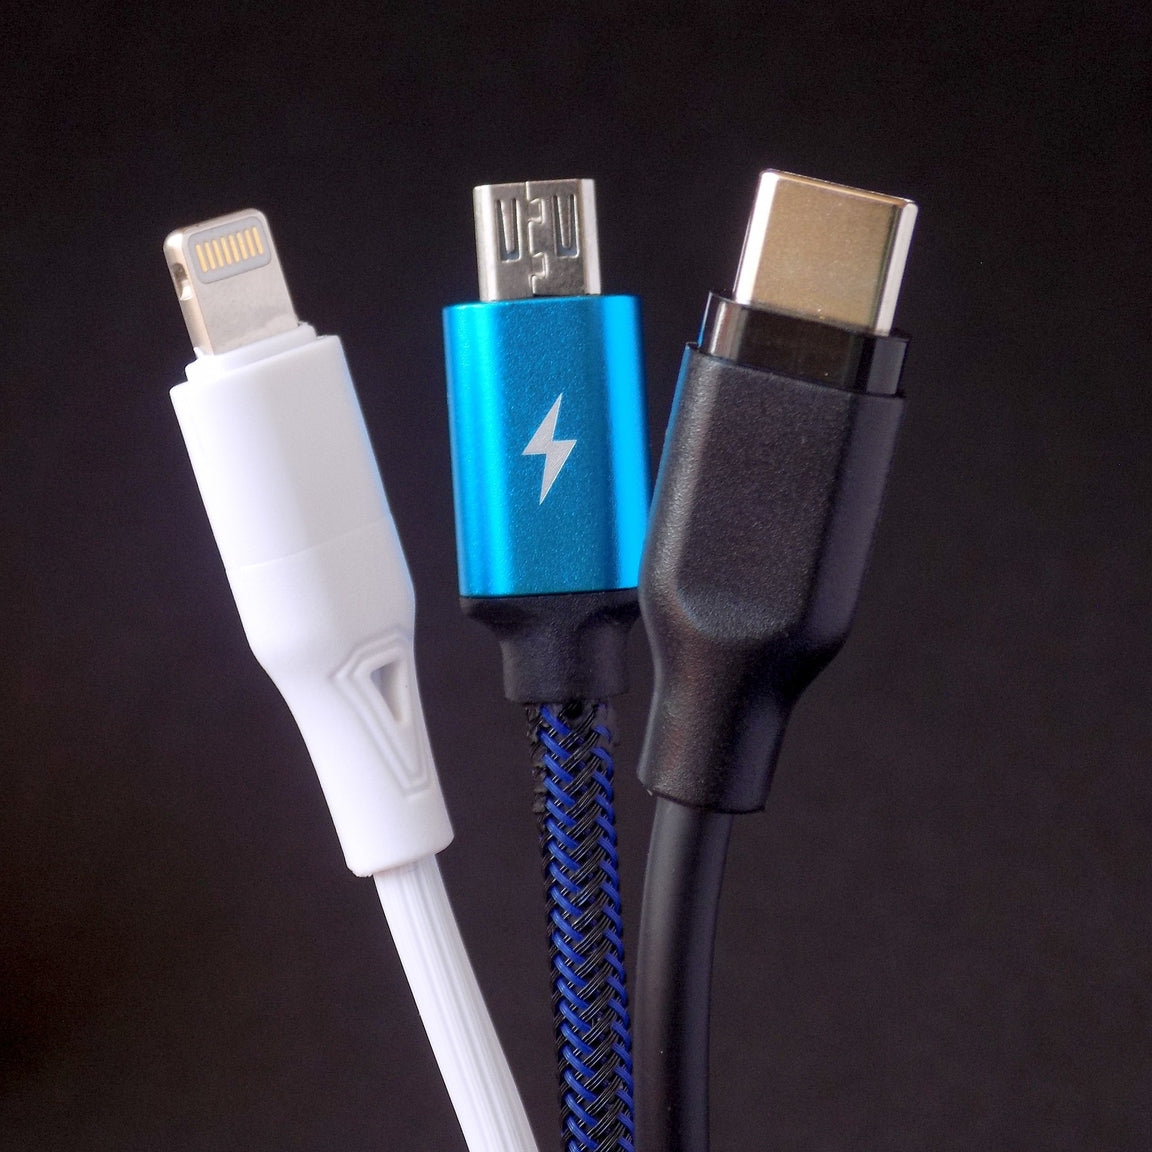 Lightning, micro-USB, and USB-C cable